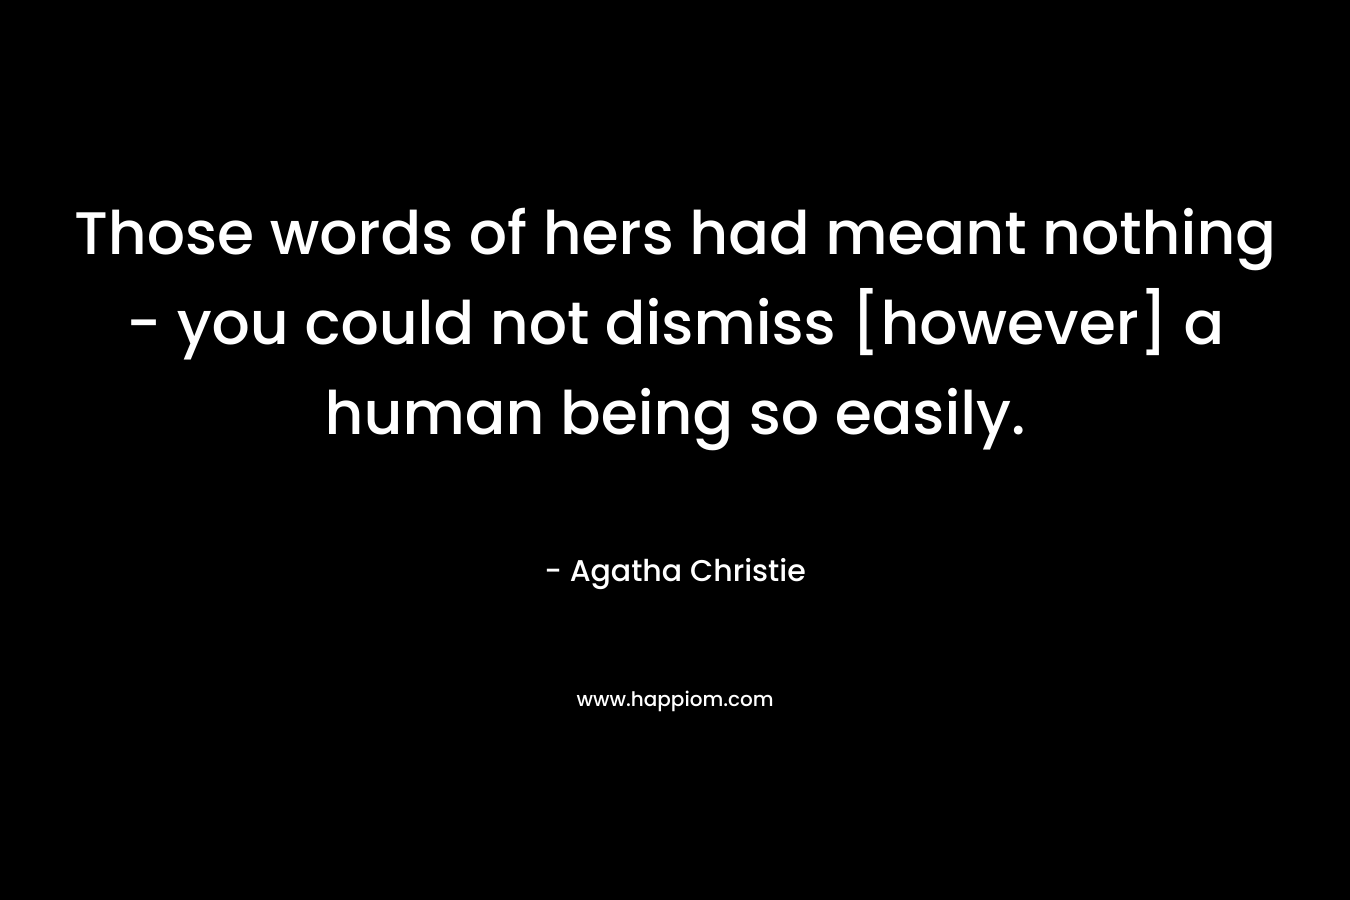 Those words of hers had meant nothing – you could not dismiss [however] a human being so easily. – Agatha Christie